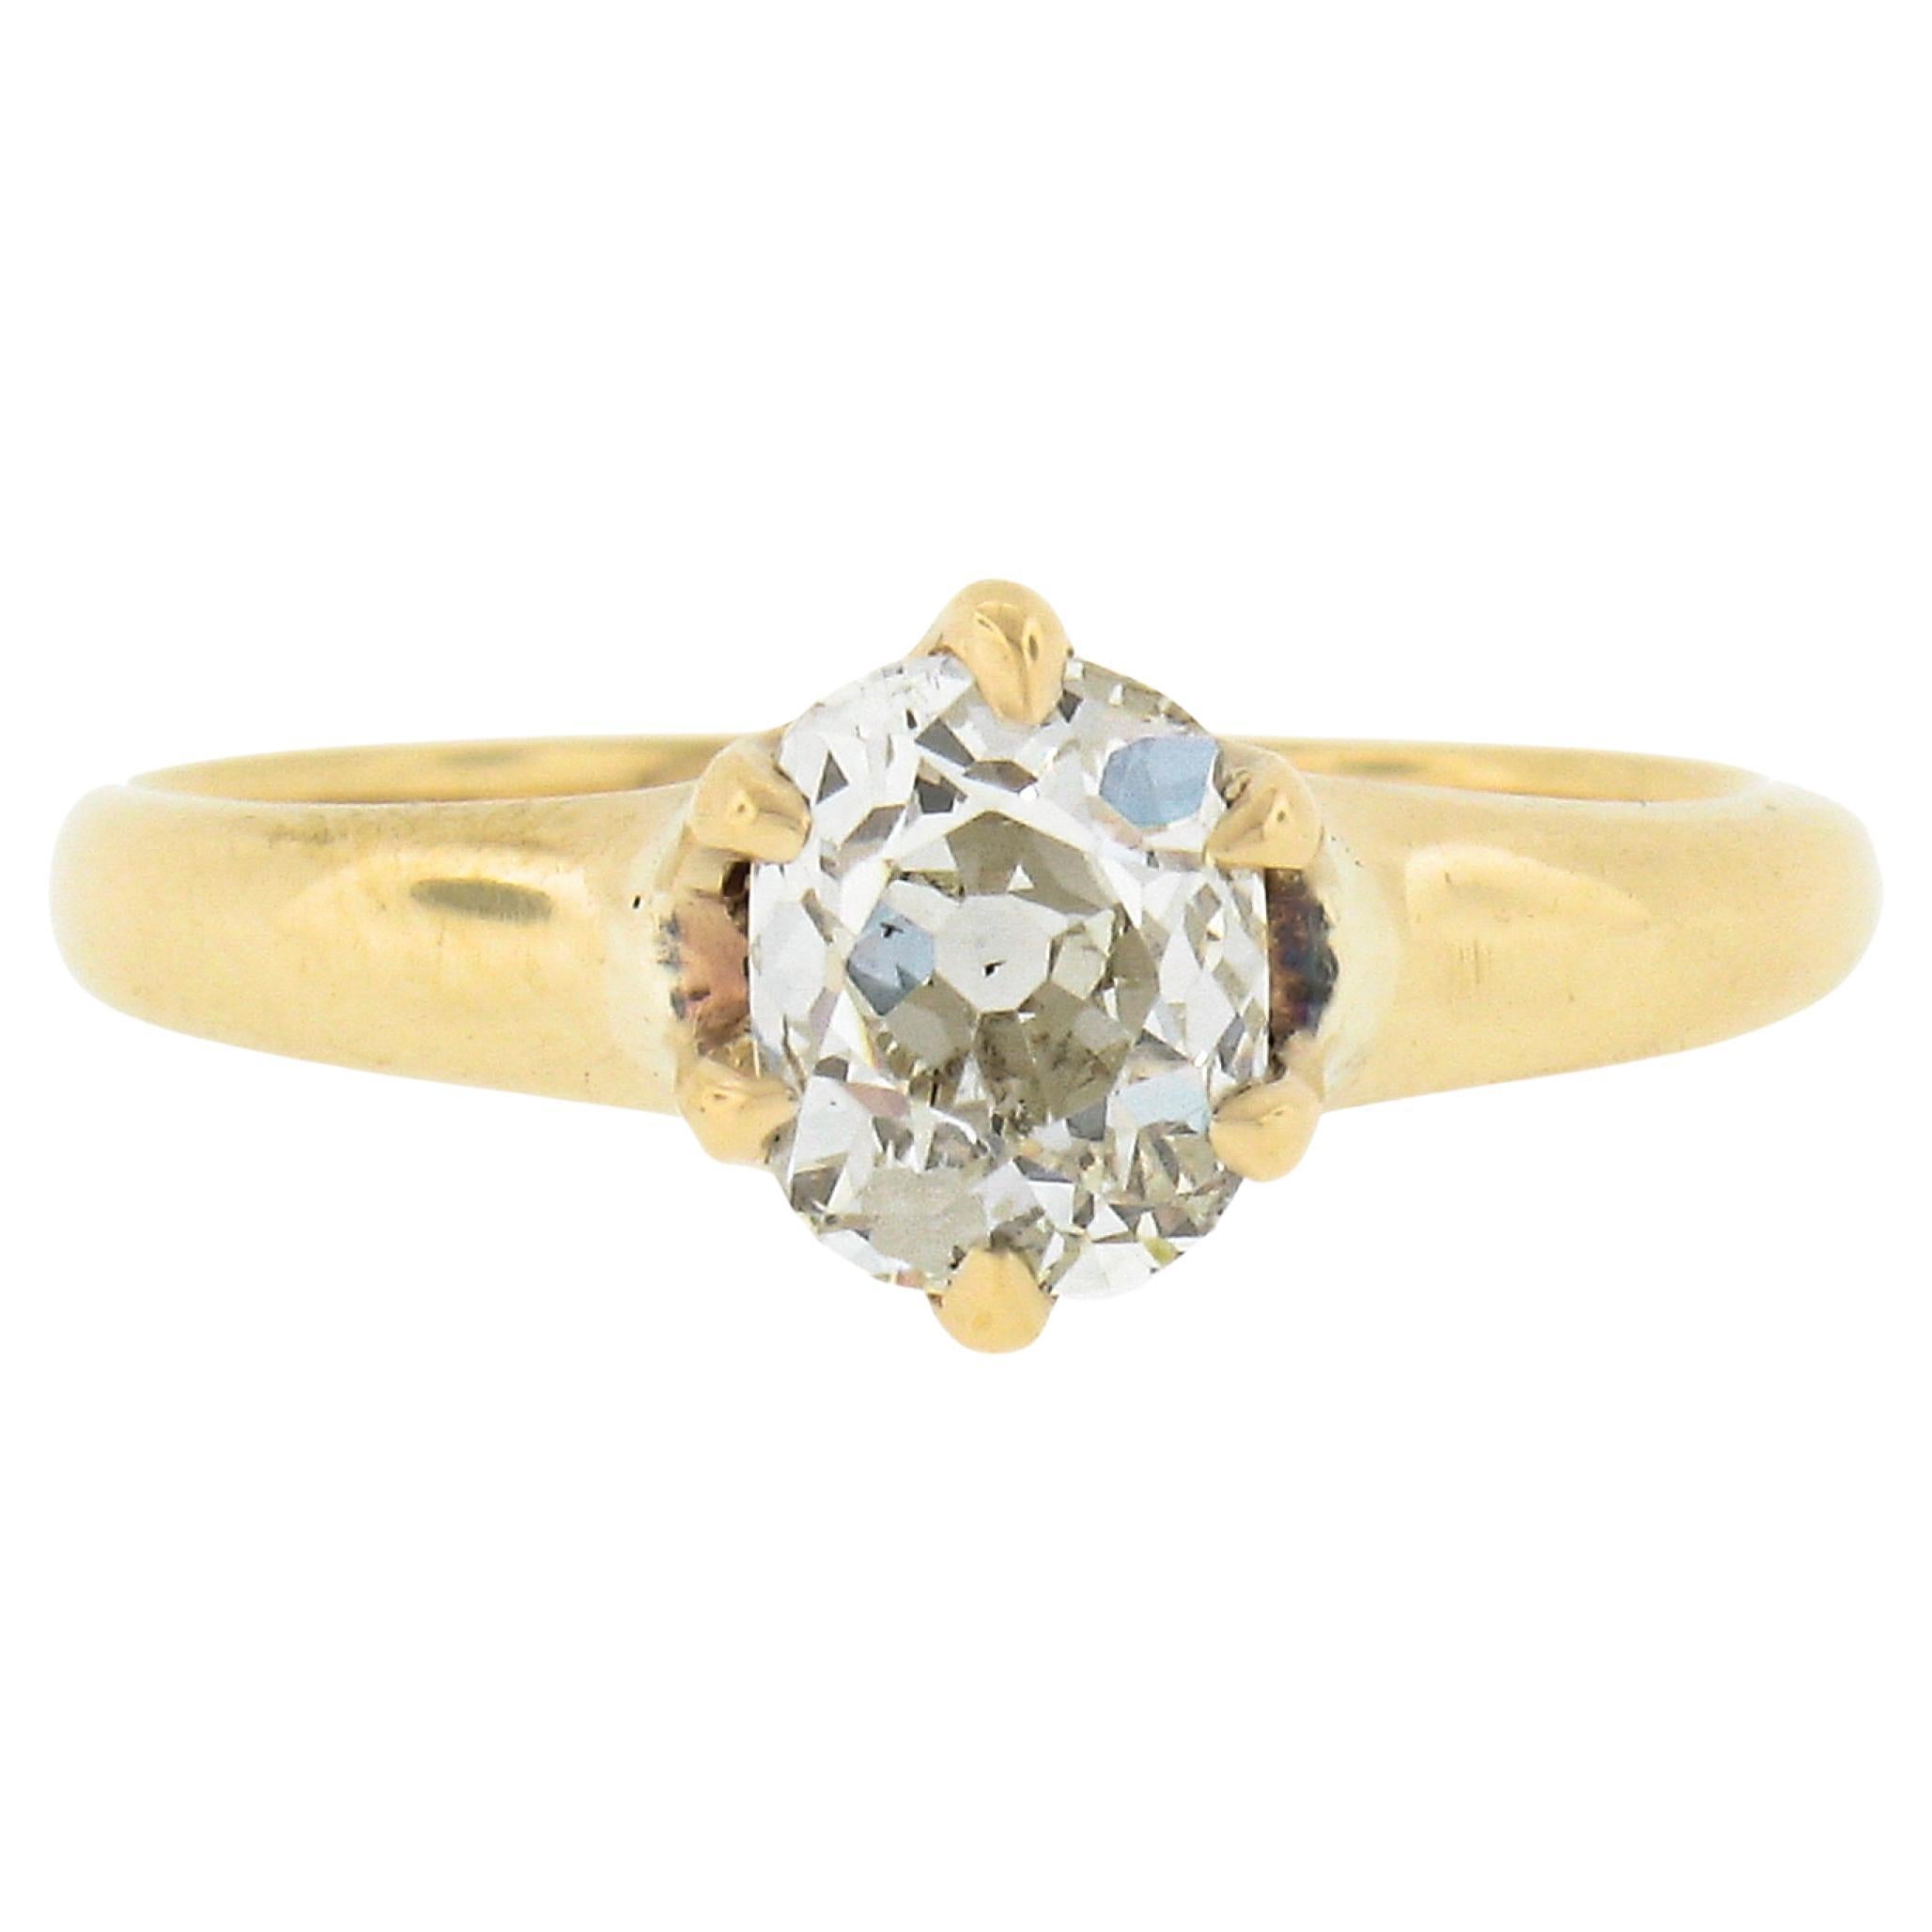 Antique Victorian 14k Gold 0.82ct Old Cushion Diamond Solitaire Engagement Ring